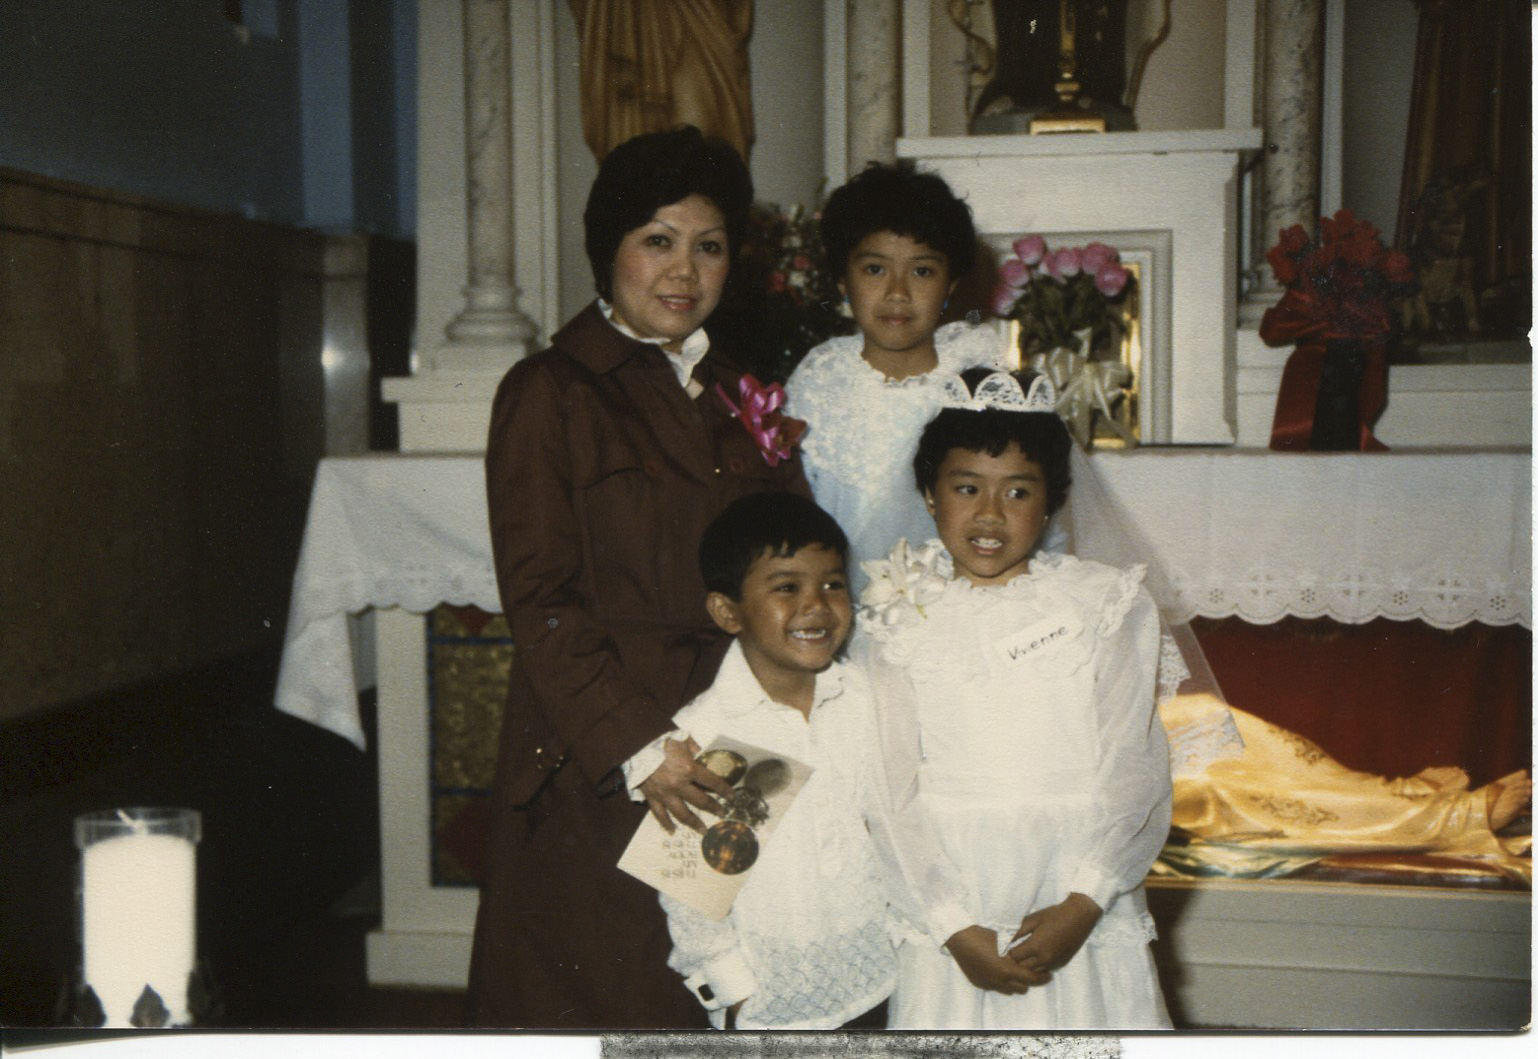 Photo of Tan's family, 1987 Taken in Chicago at Our Lady of Pompeii Church, Lexington. The back of the photo says “Please return to Necitas D. Tan class of 1963”. Pictured: back row L-R: Necitas, daughter Simonette. Back row: son Jason, daughter Vivienne. Tan said the photo, “shows the beginningof my life.” Tan said the photo shows her family and represents the transition from being single to being married with a family in America. Tan’s husband (Cesary Tan) is taking the photo. Tan is an orphan; her father died in WWII. She took an exam and passed it to getinto school. All Tan’s children are grown. Her daughter is married and has two kids in San Diego. Tan’s daughter Simonette is the manager of an investment company. Her daughter Vivienne is a graphic designer. Her son Jason an electronic engineer. Any views, findings, conclusions, or recommendations expressed in this story do not necessarily represent those of the National Endowment for the Humanities. (c) Field Museum of Natural History - CC BY-NC 4.0